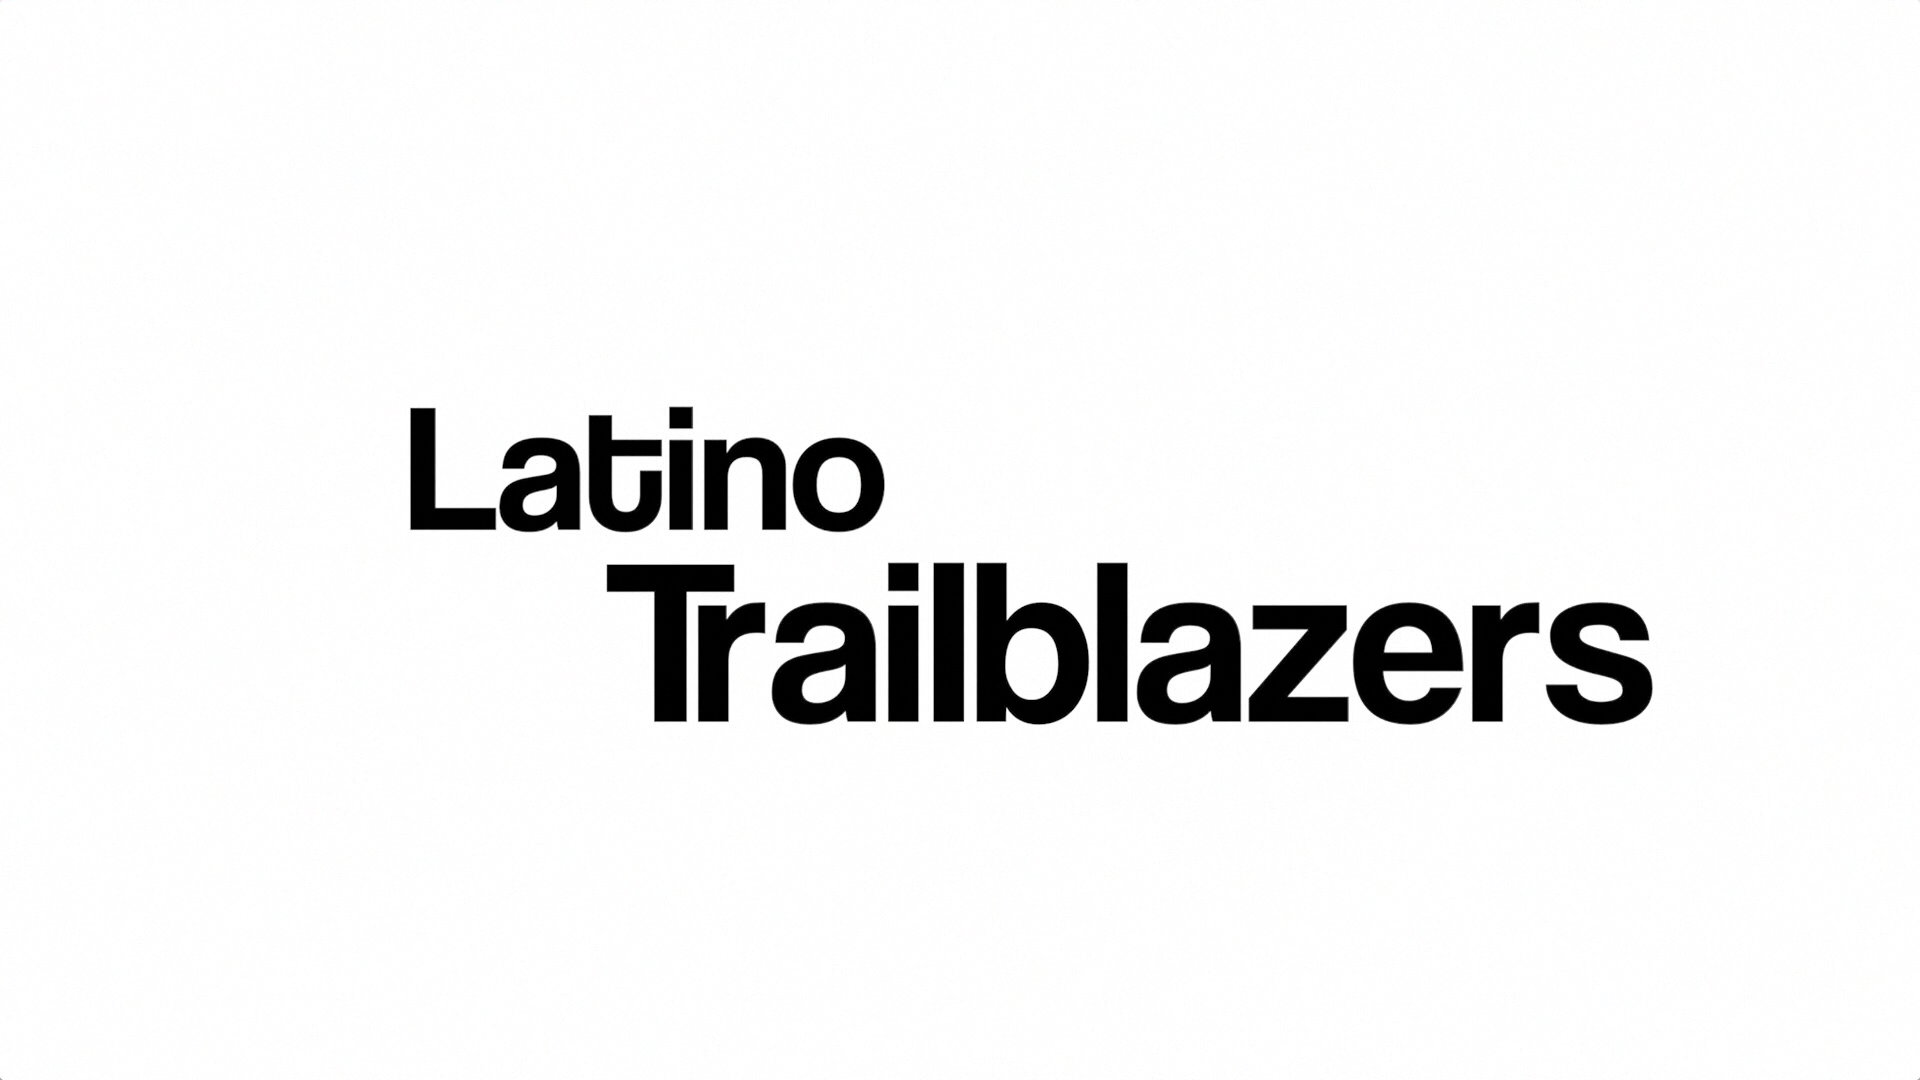 DigiBunch Recognizes 2013 Class of Latino Trailblazers with Unique Online Video Series during Hispanic Heritage Month